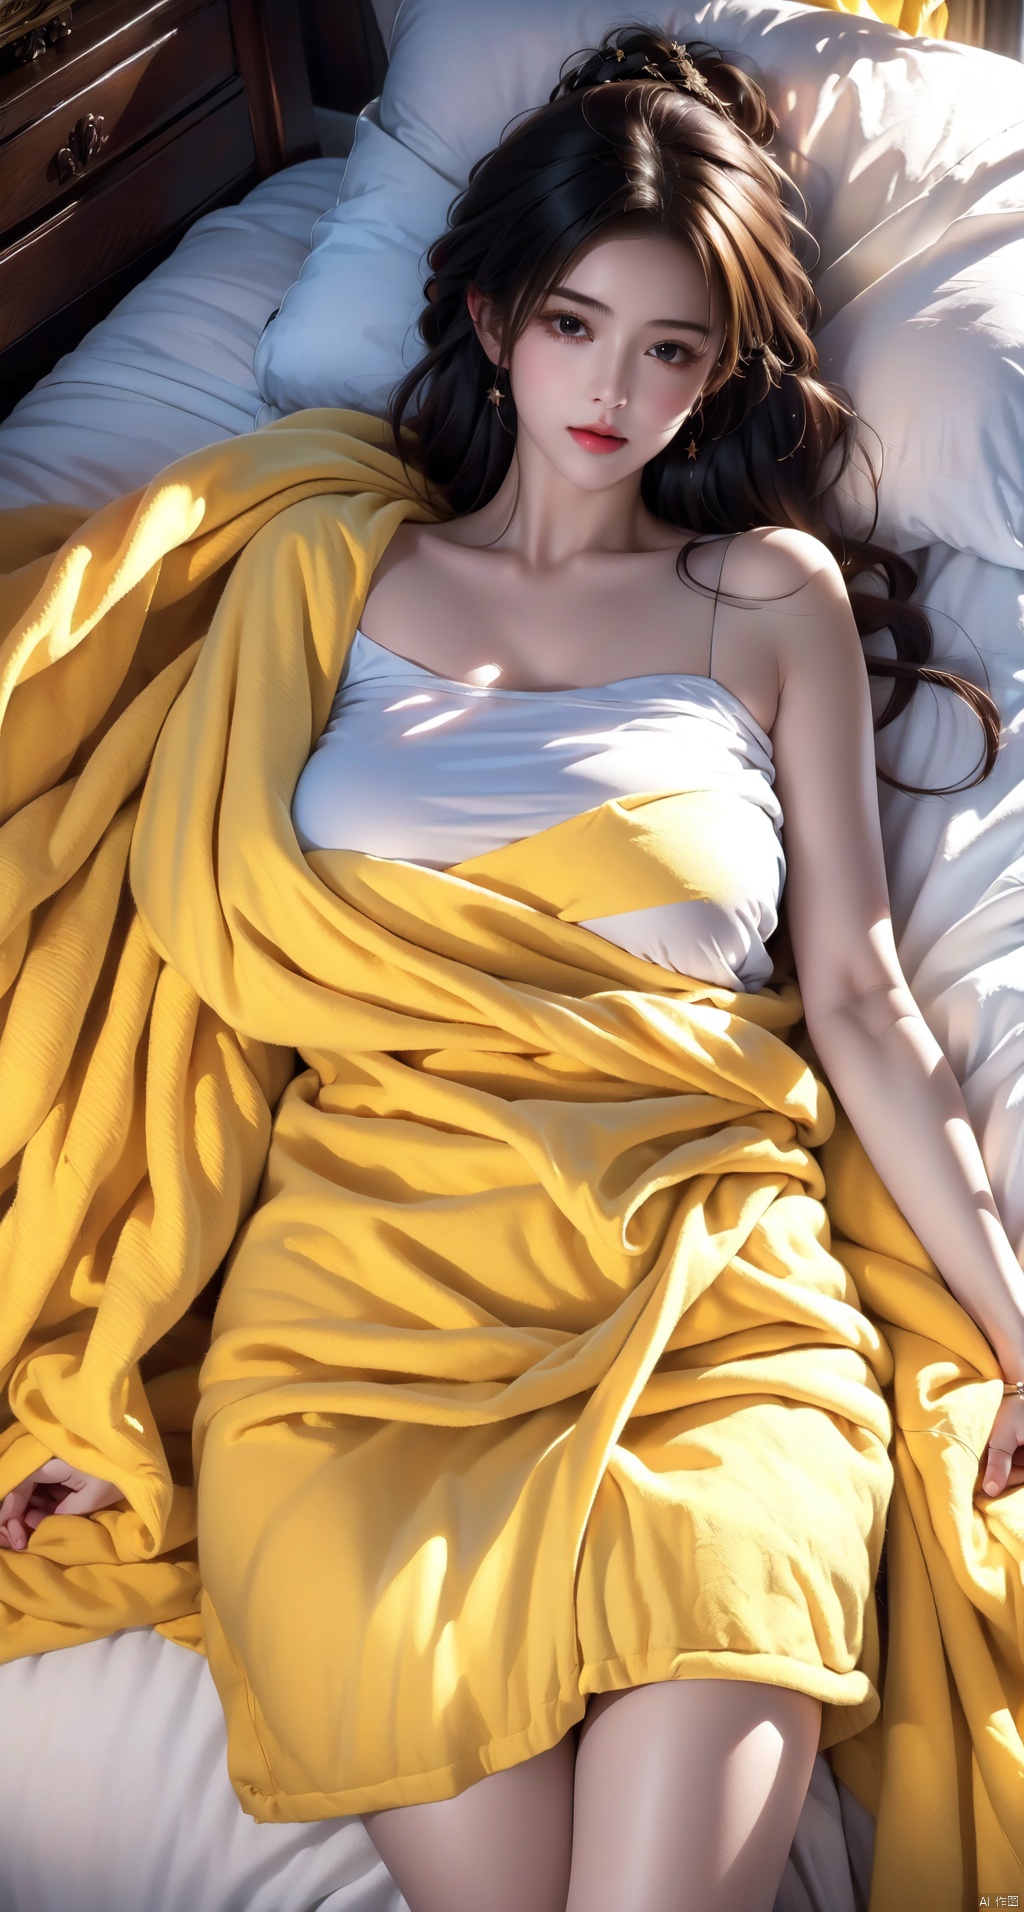 1girl, laying on bed, wearing a blanket, yellow blanket, yellow furry blanket, yellow fluffy blanket, laying on bed, lower body covered by blanket, above view, looking at the view, background indoor bedroom, lora:more_details:0.5